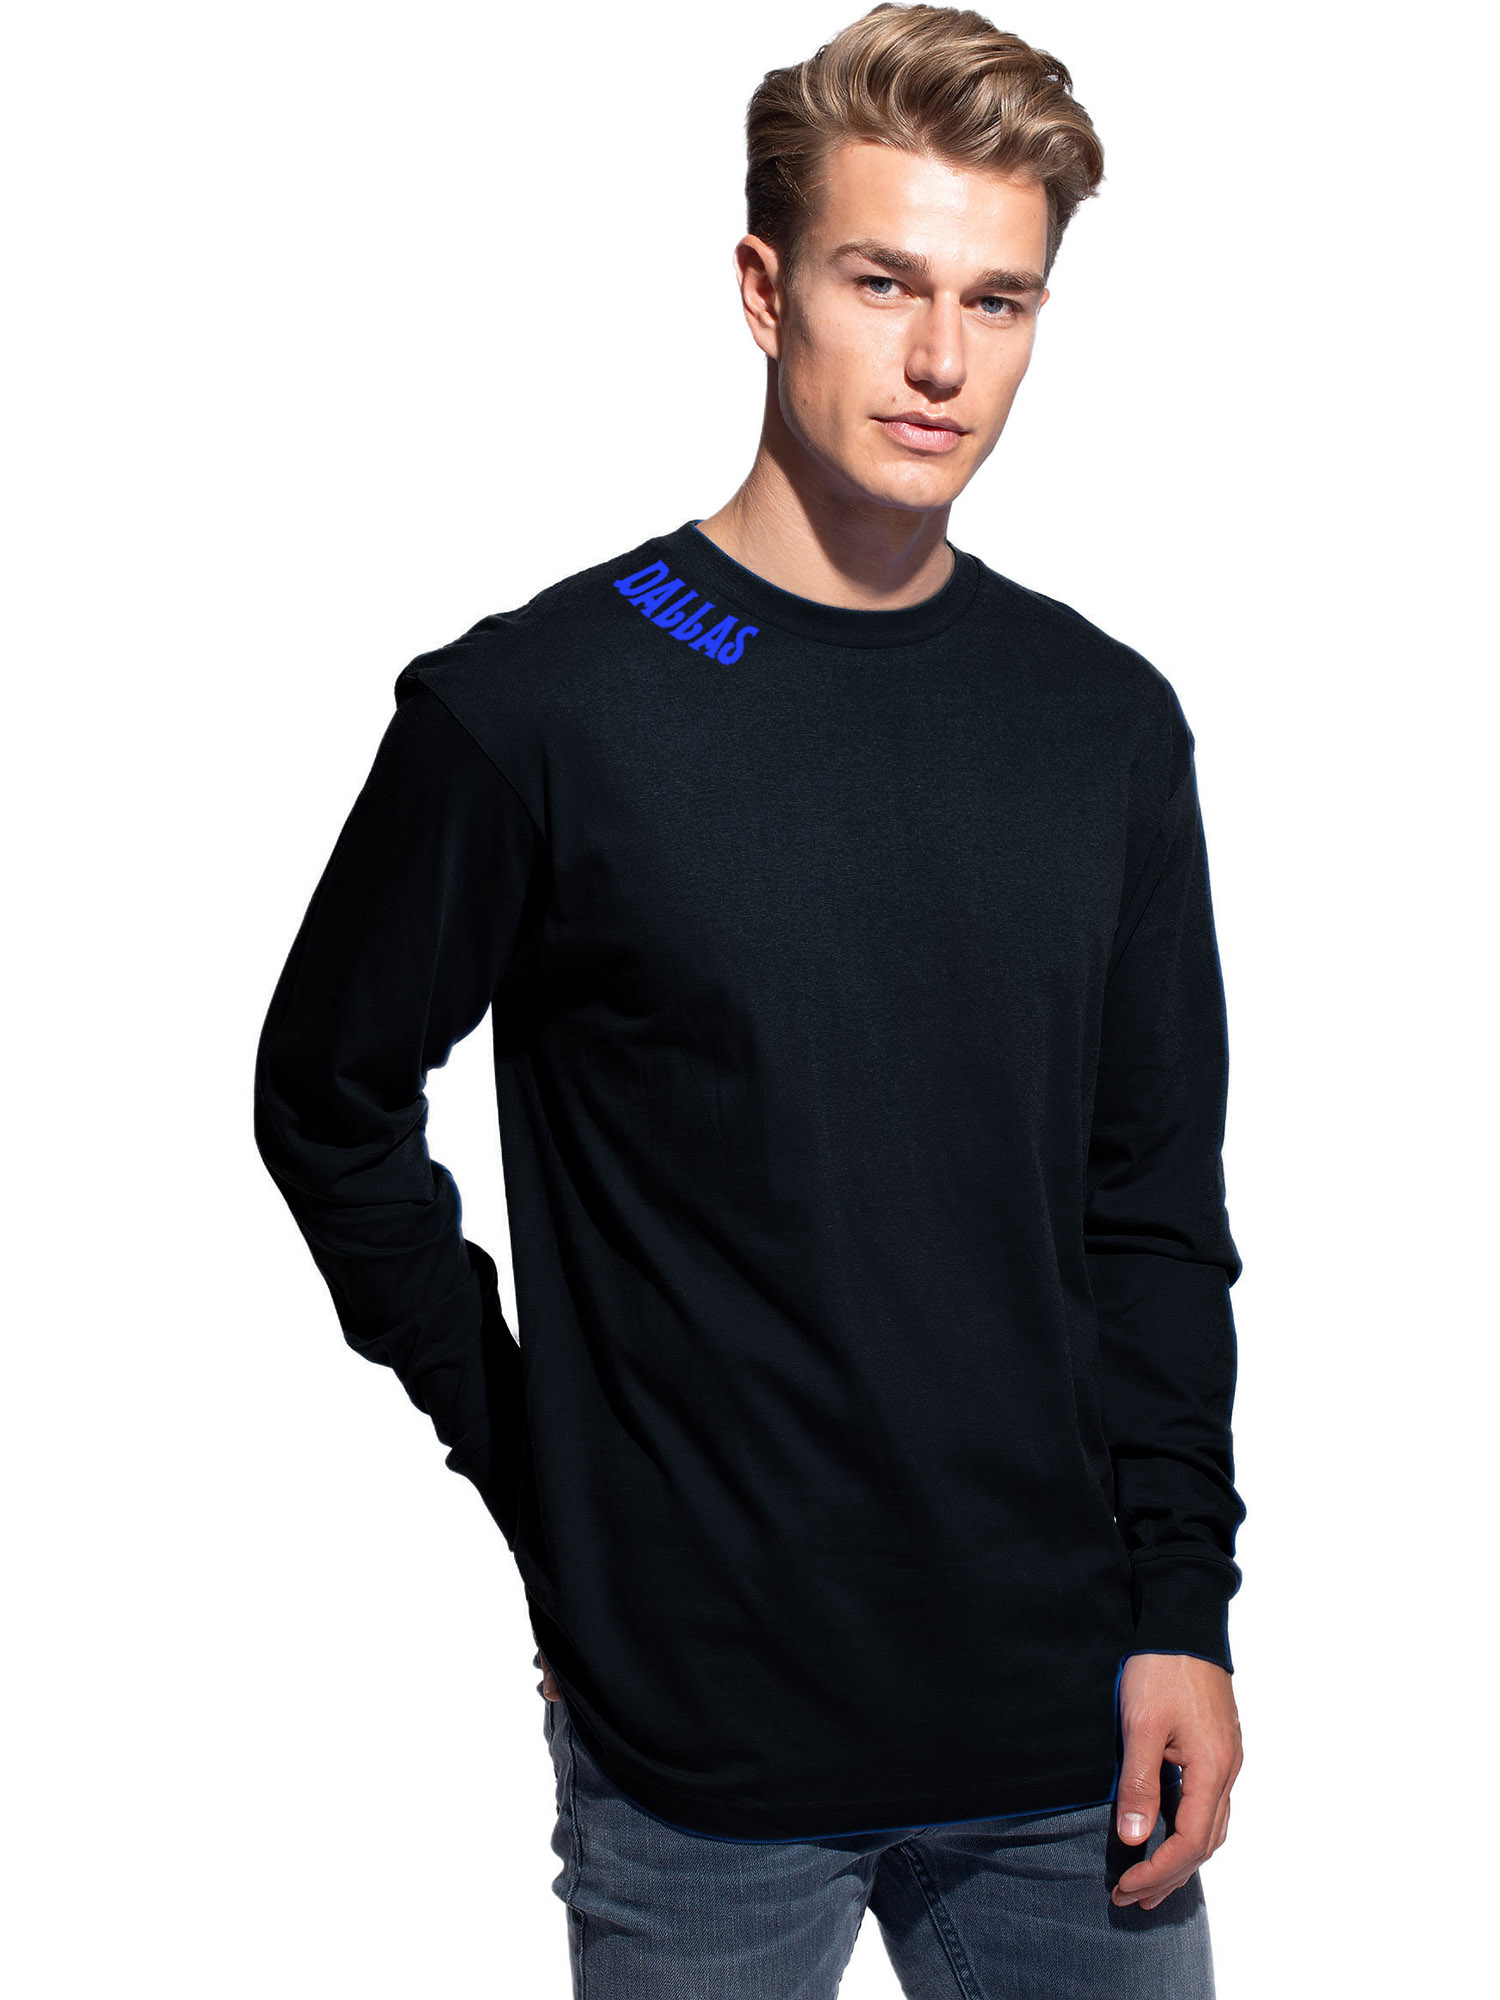 Daxton Premium Dallas Men Long Sleeves T Shirt Ultra Soft Medium Weight Cotton, Black Tee Royal Letters Large - image 1 of 3